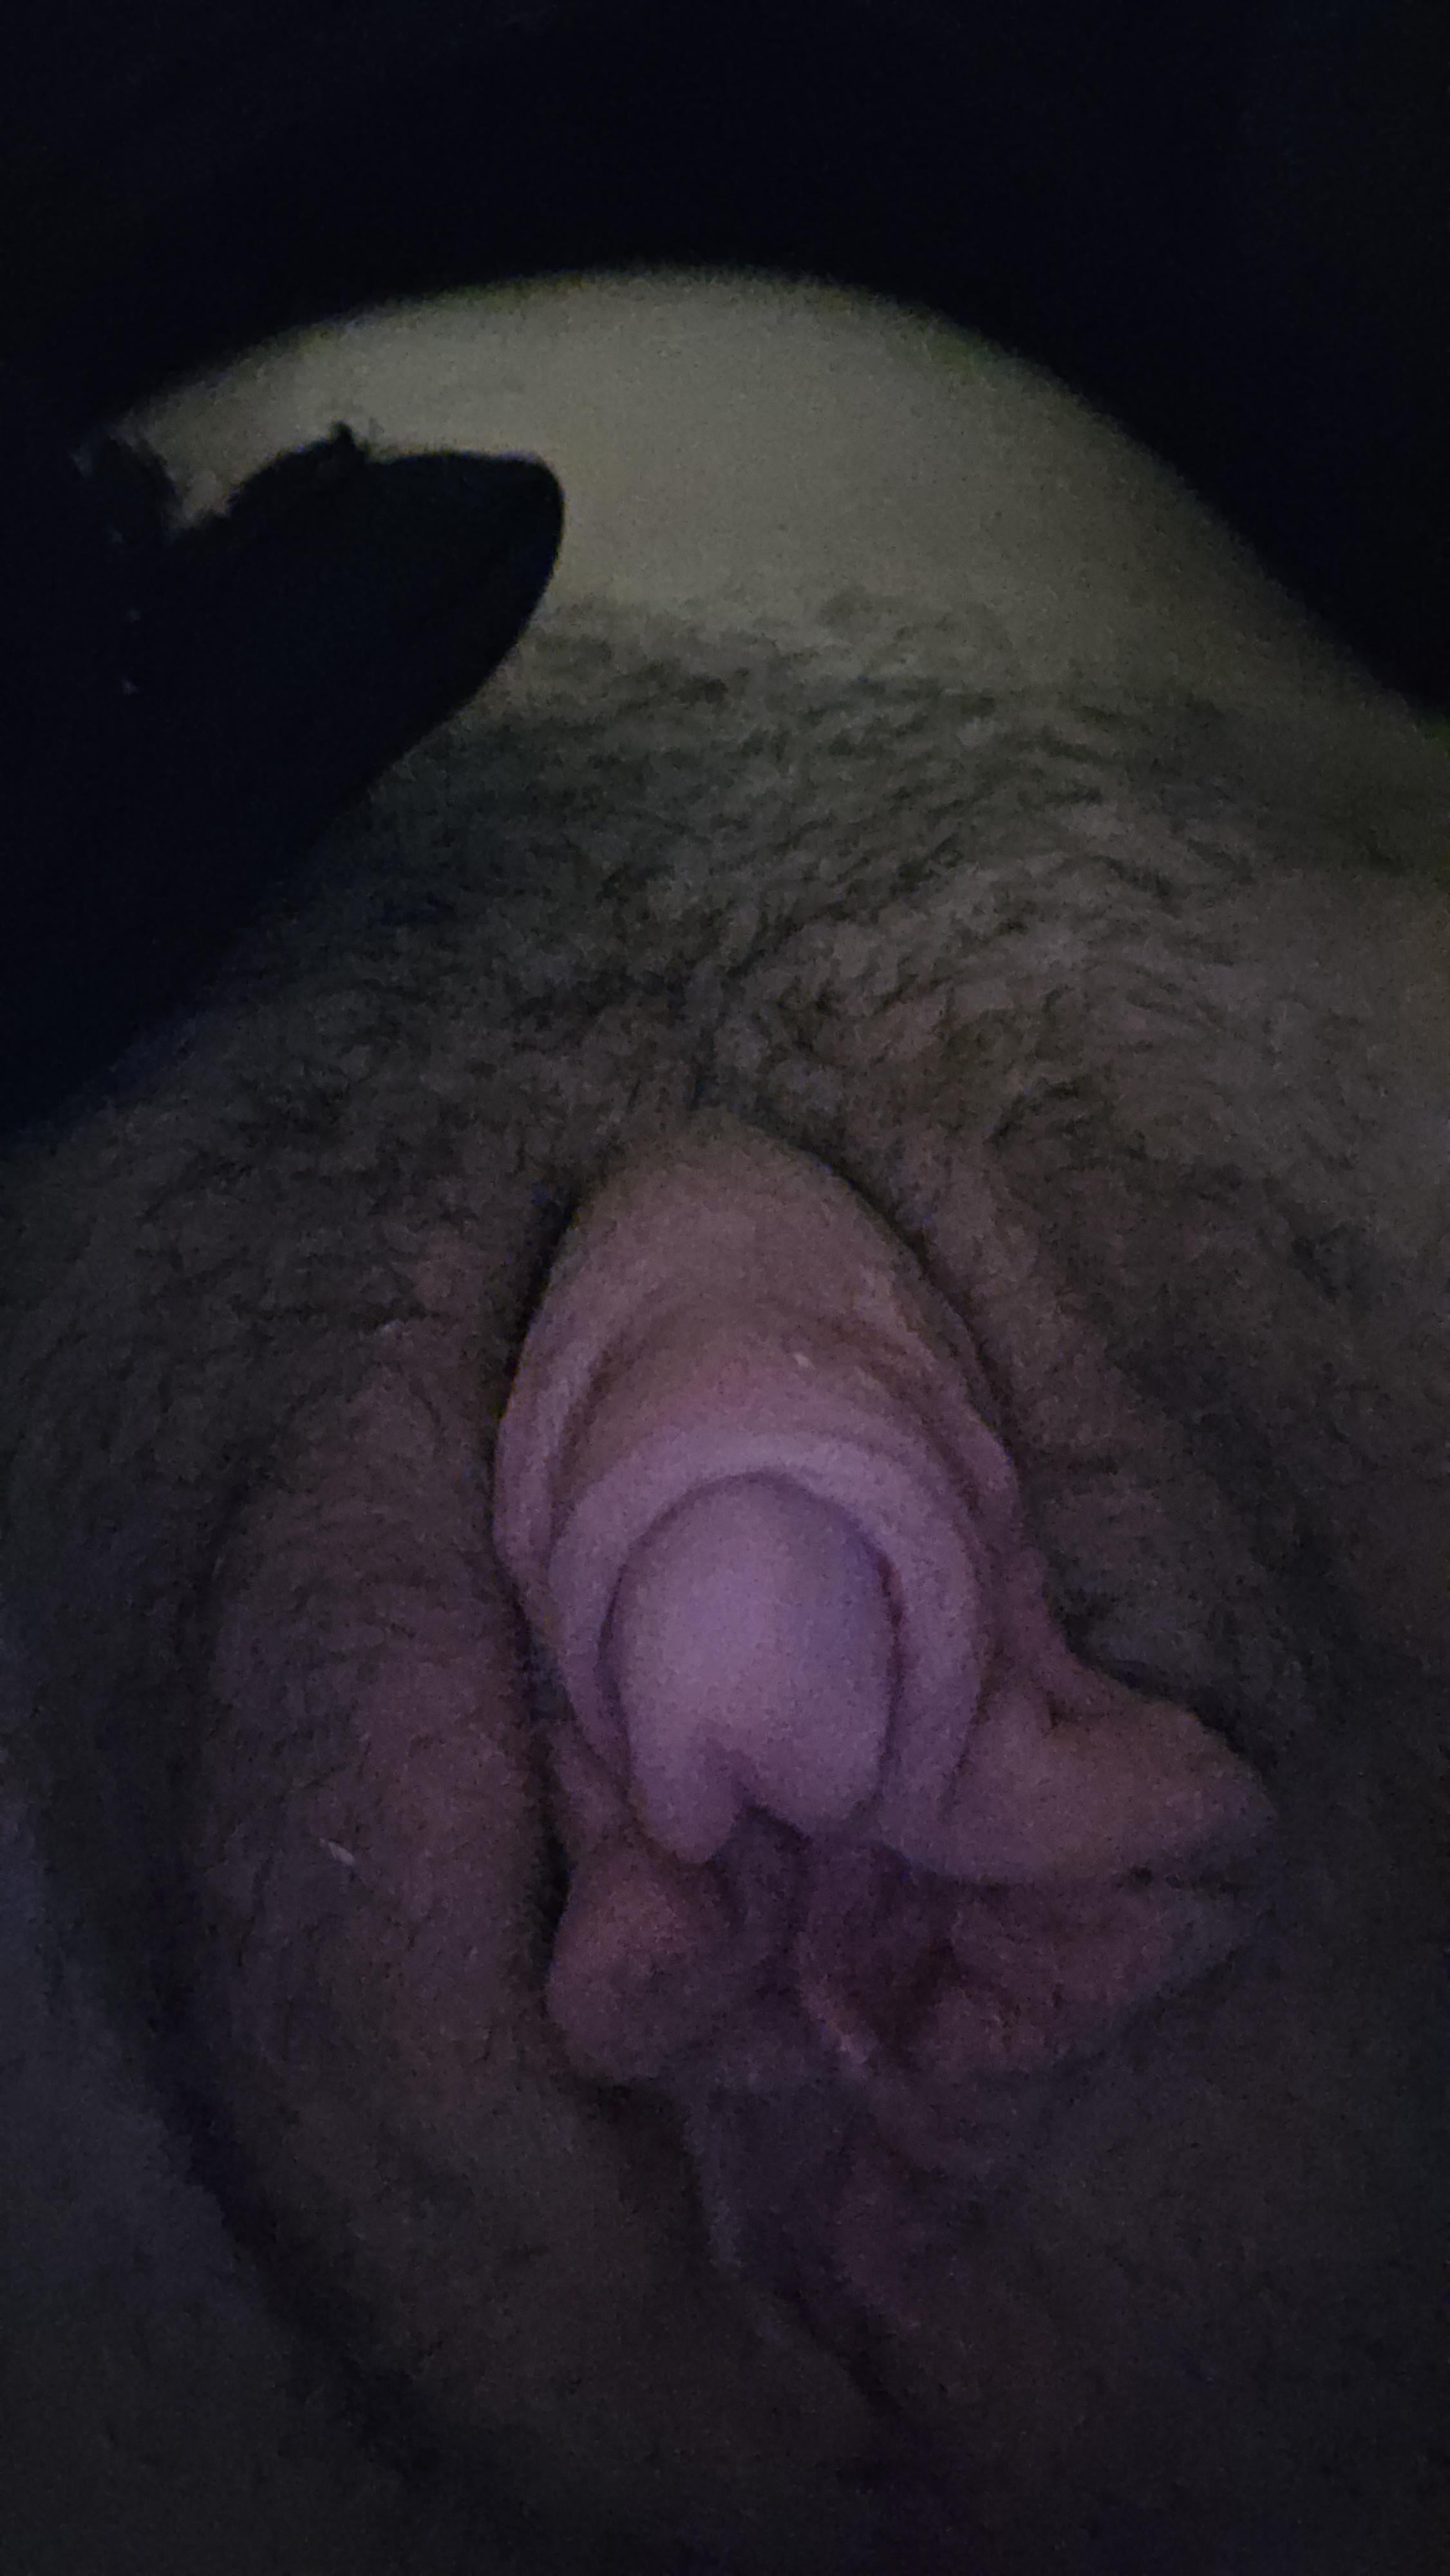 First post v nervous What do you think